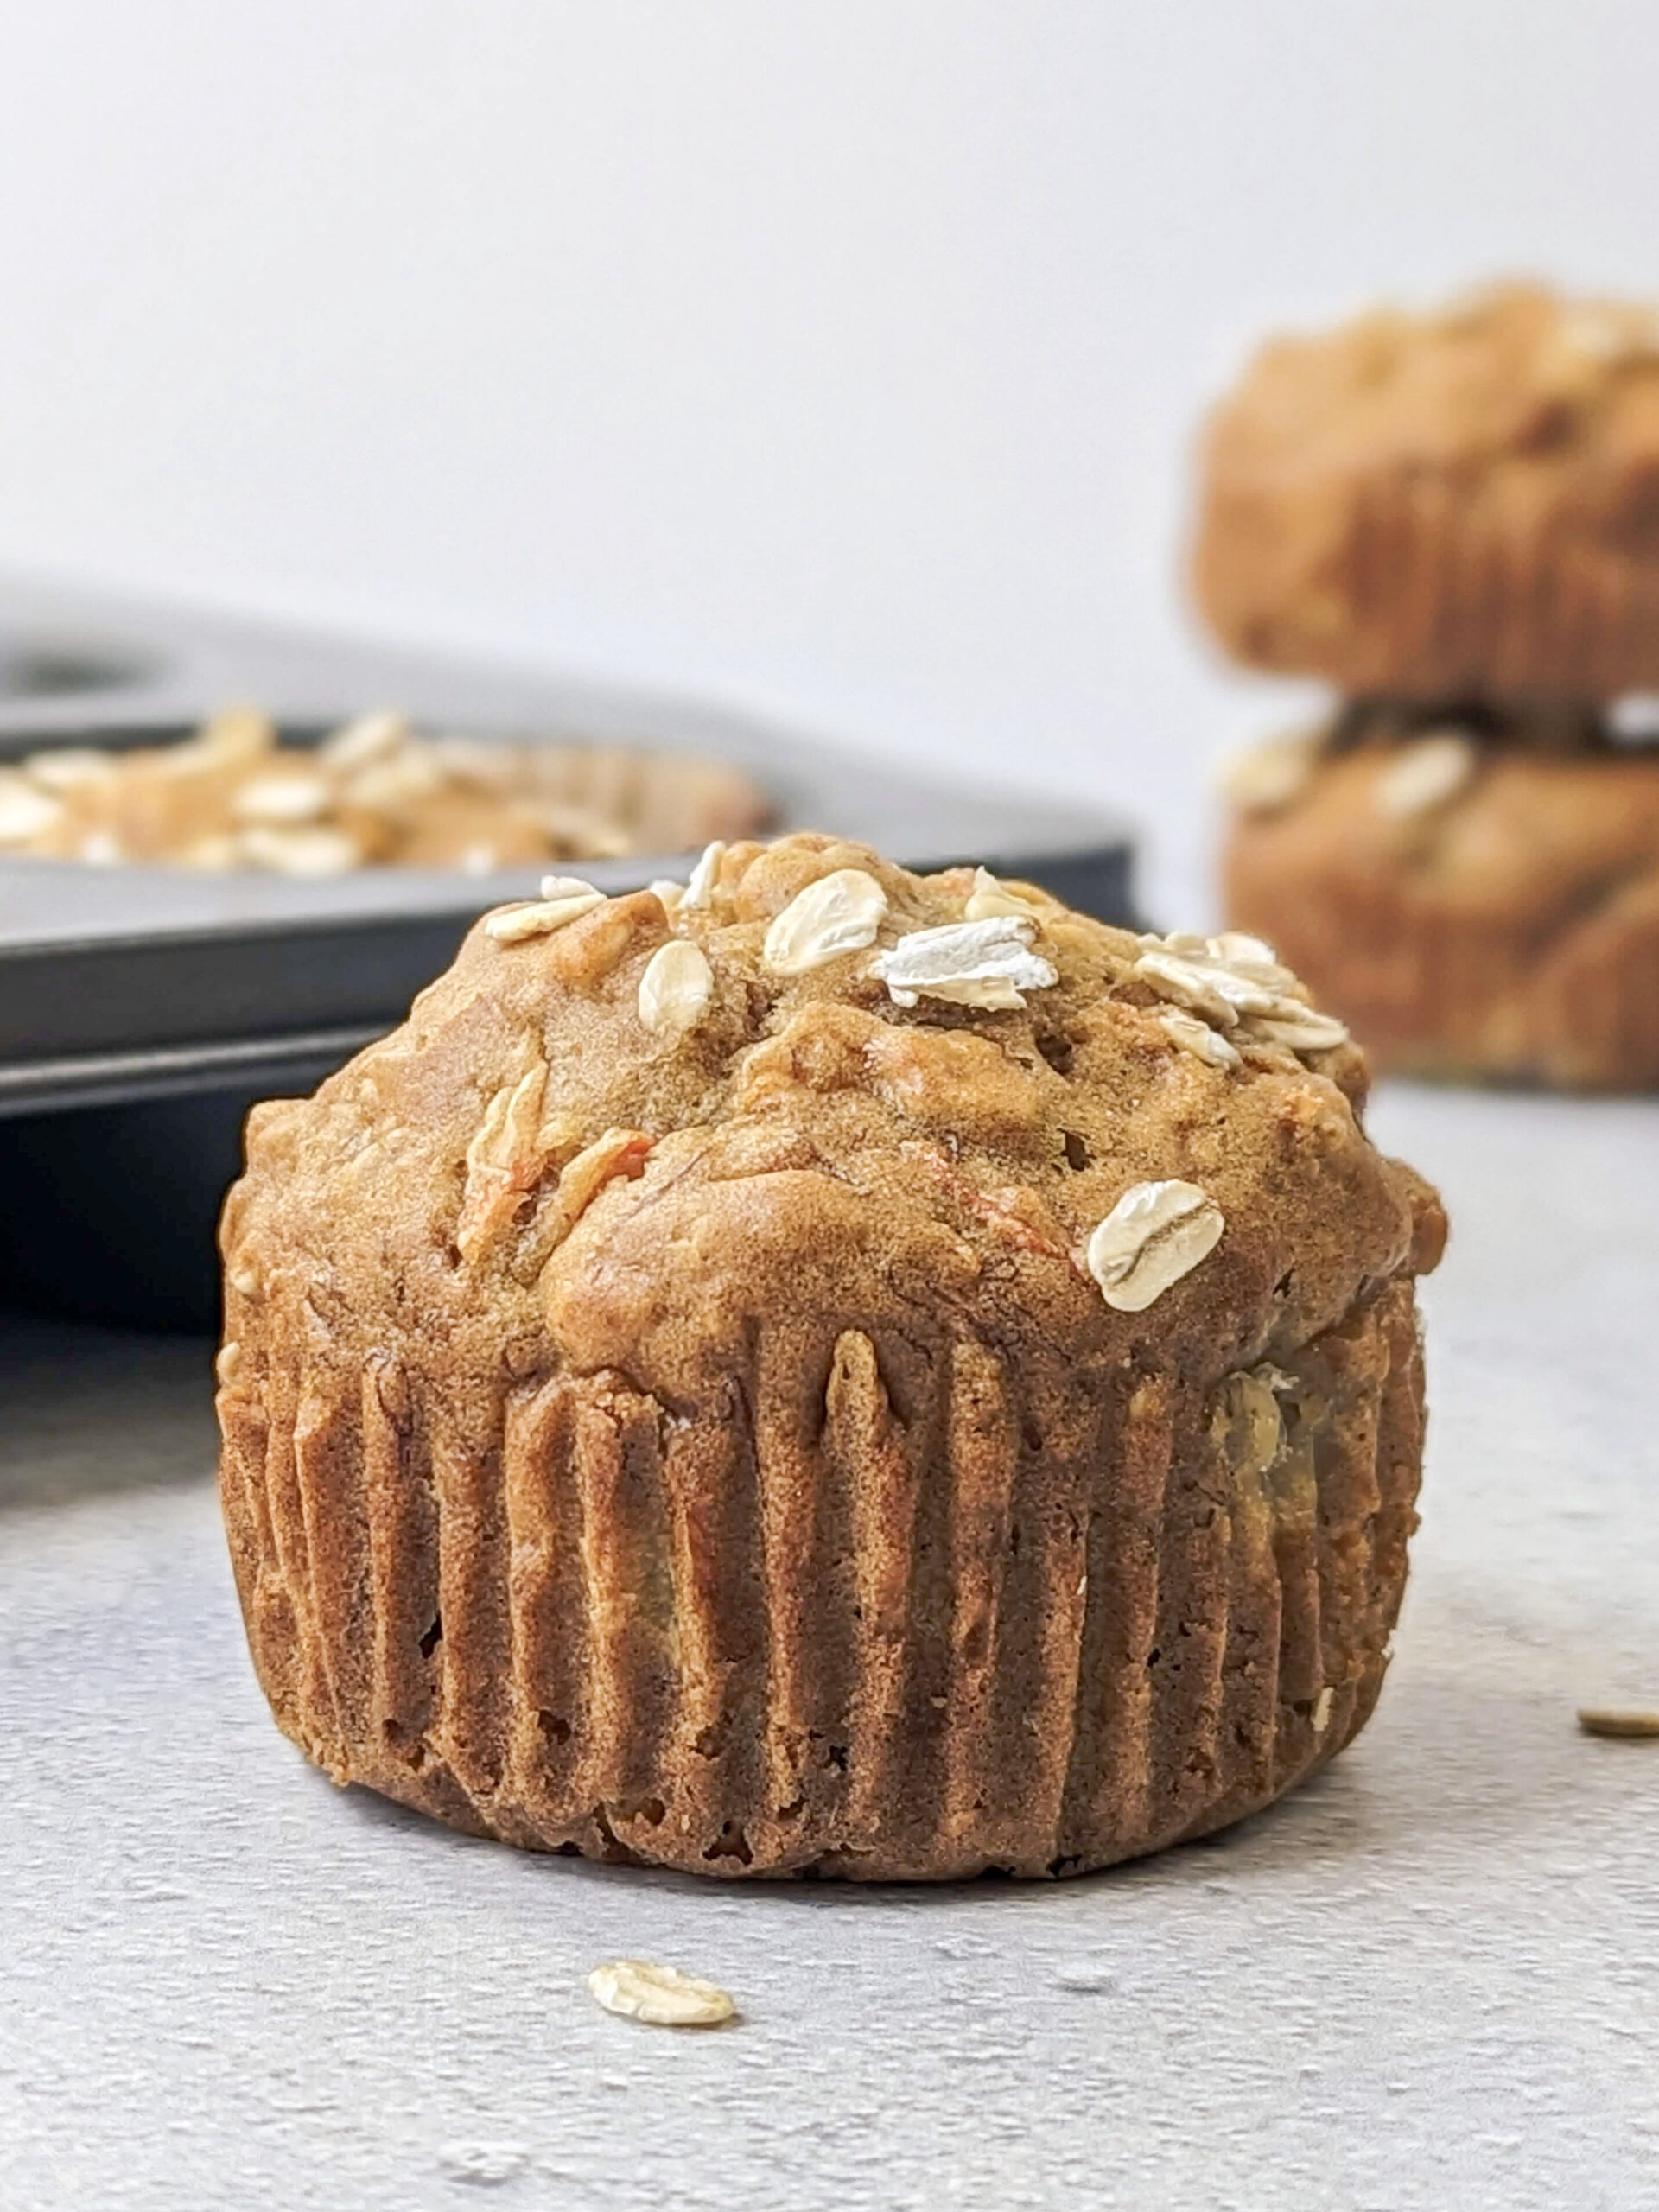 A close up of a banana carrot muffin with muffins in the background.